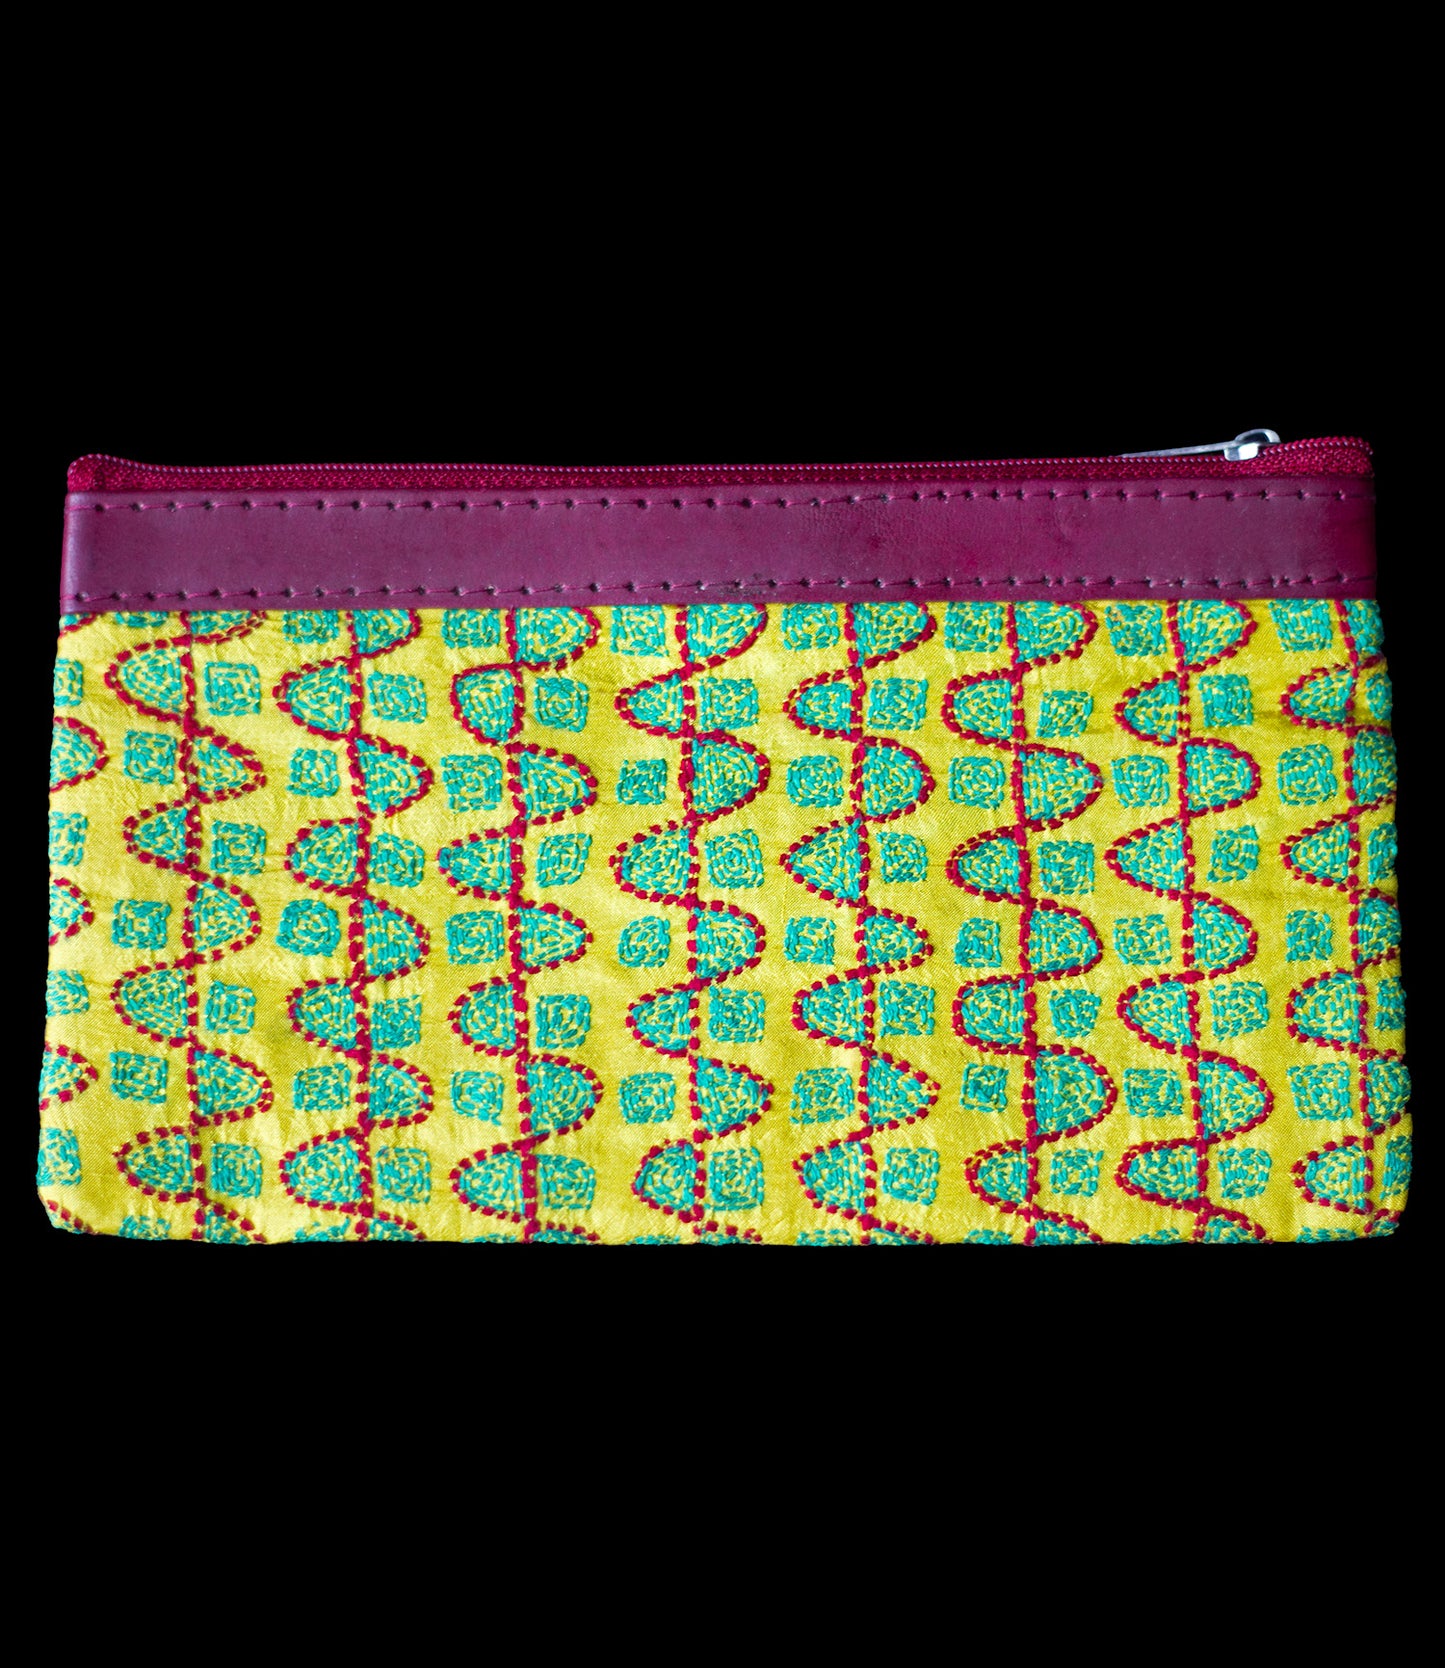 Copy or Embroidered silk pouch yellow-turquoise-red